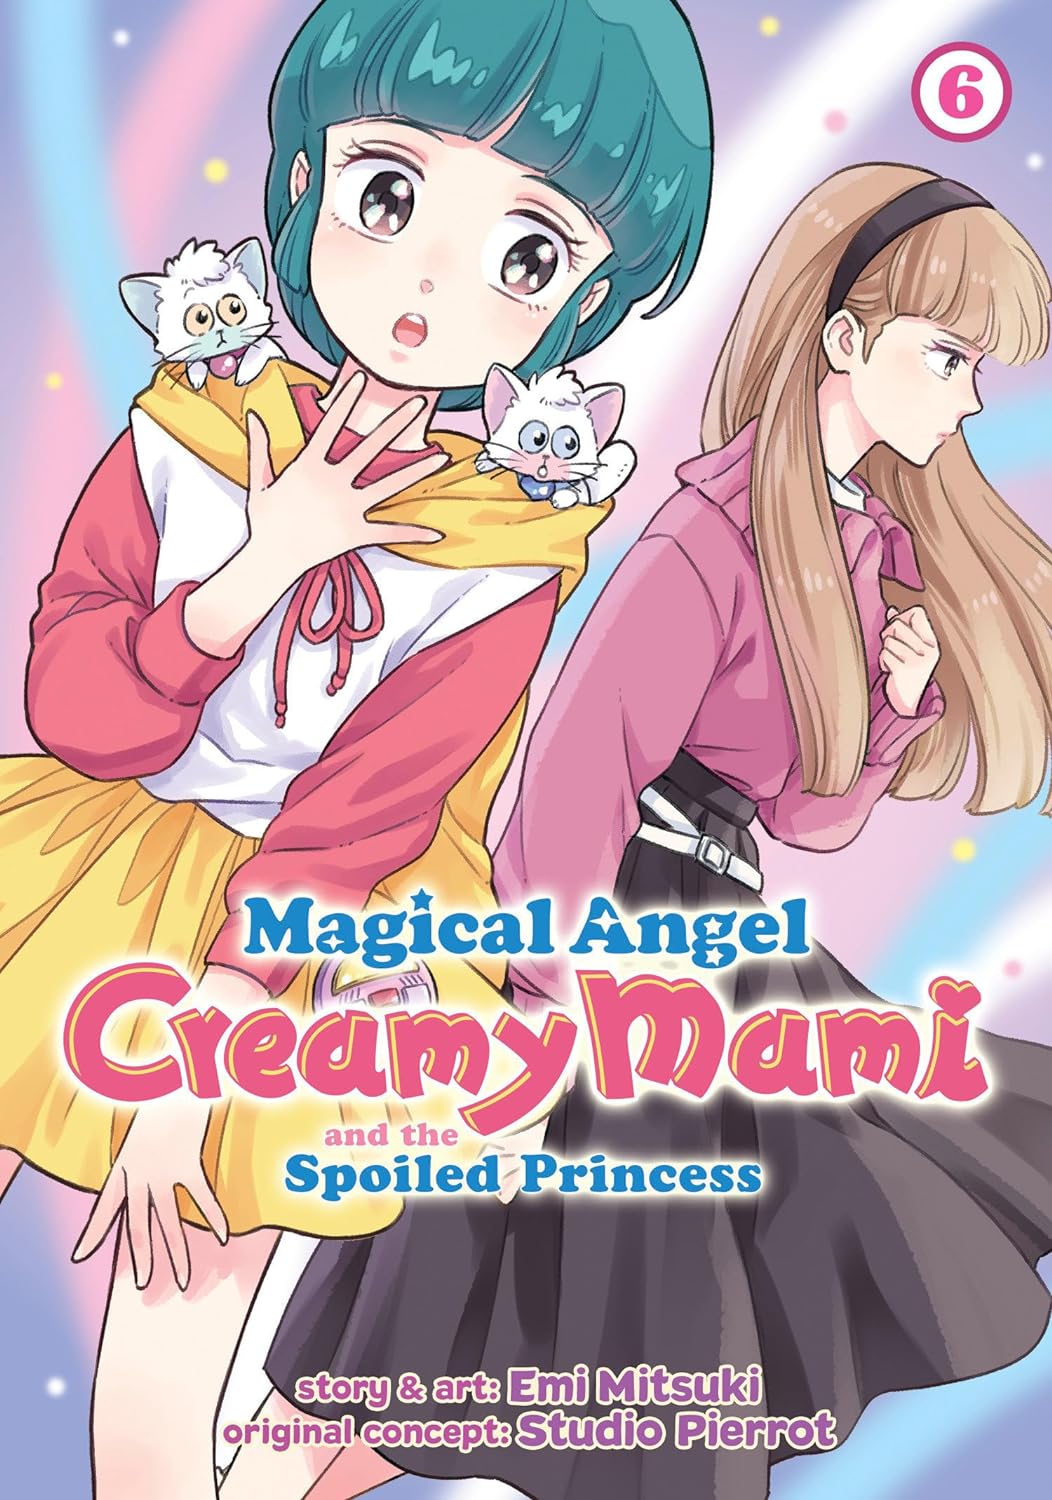 Magical Angel Creamy Mami and the Spoiled Princess Vol. 06